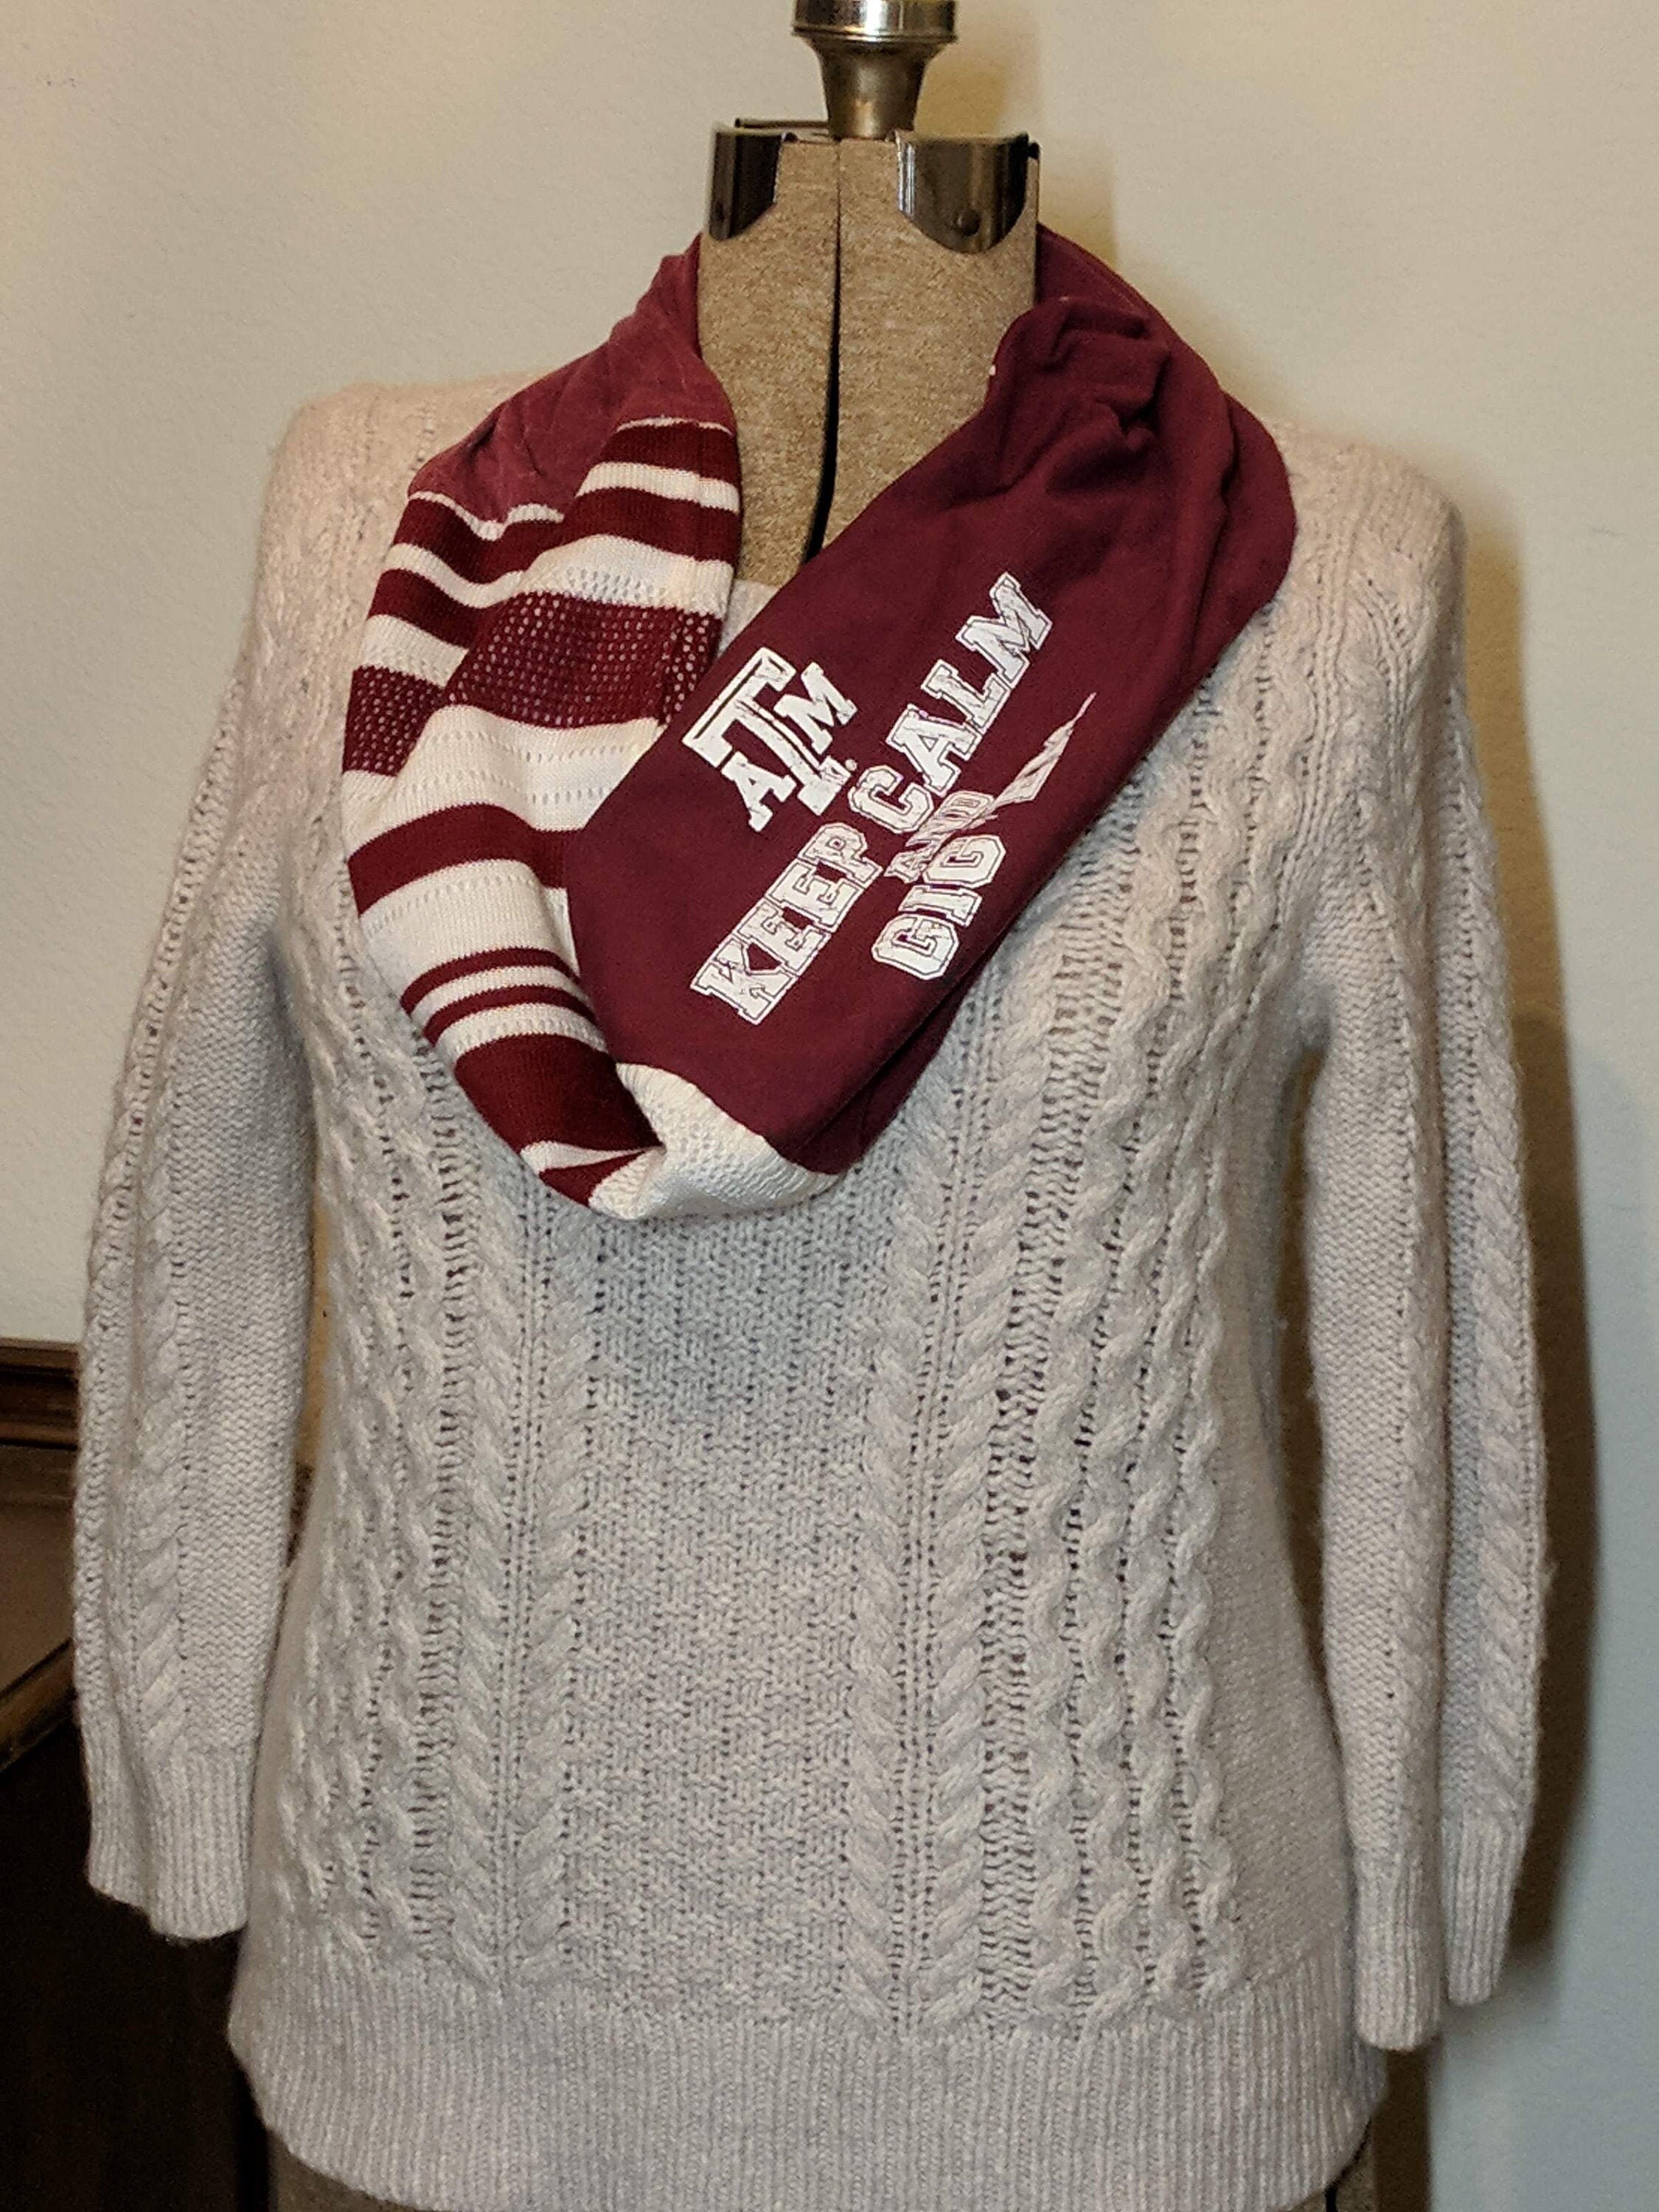 Texas A&M University Upcycled T-shirts Infinity Scarf in Maroon and ...